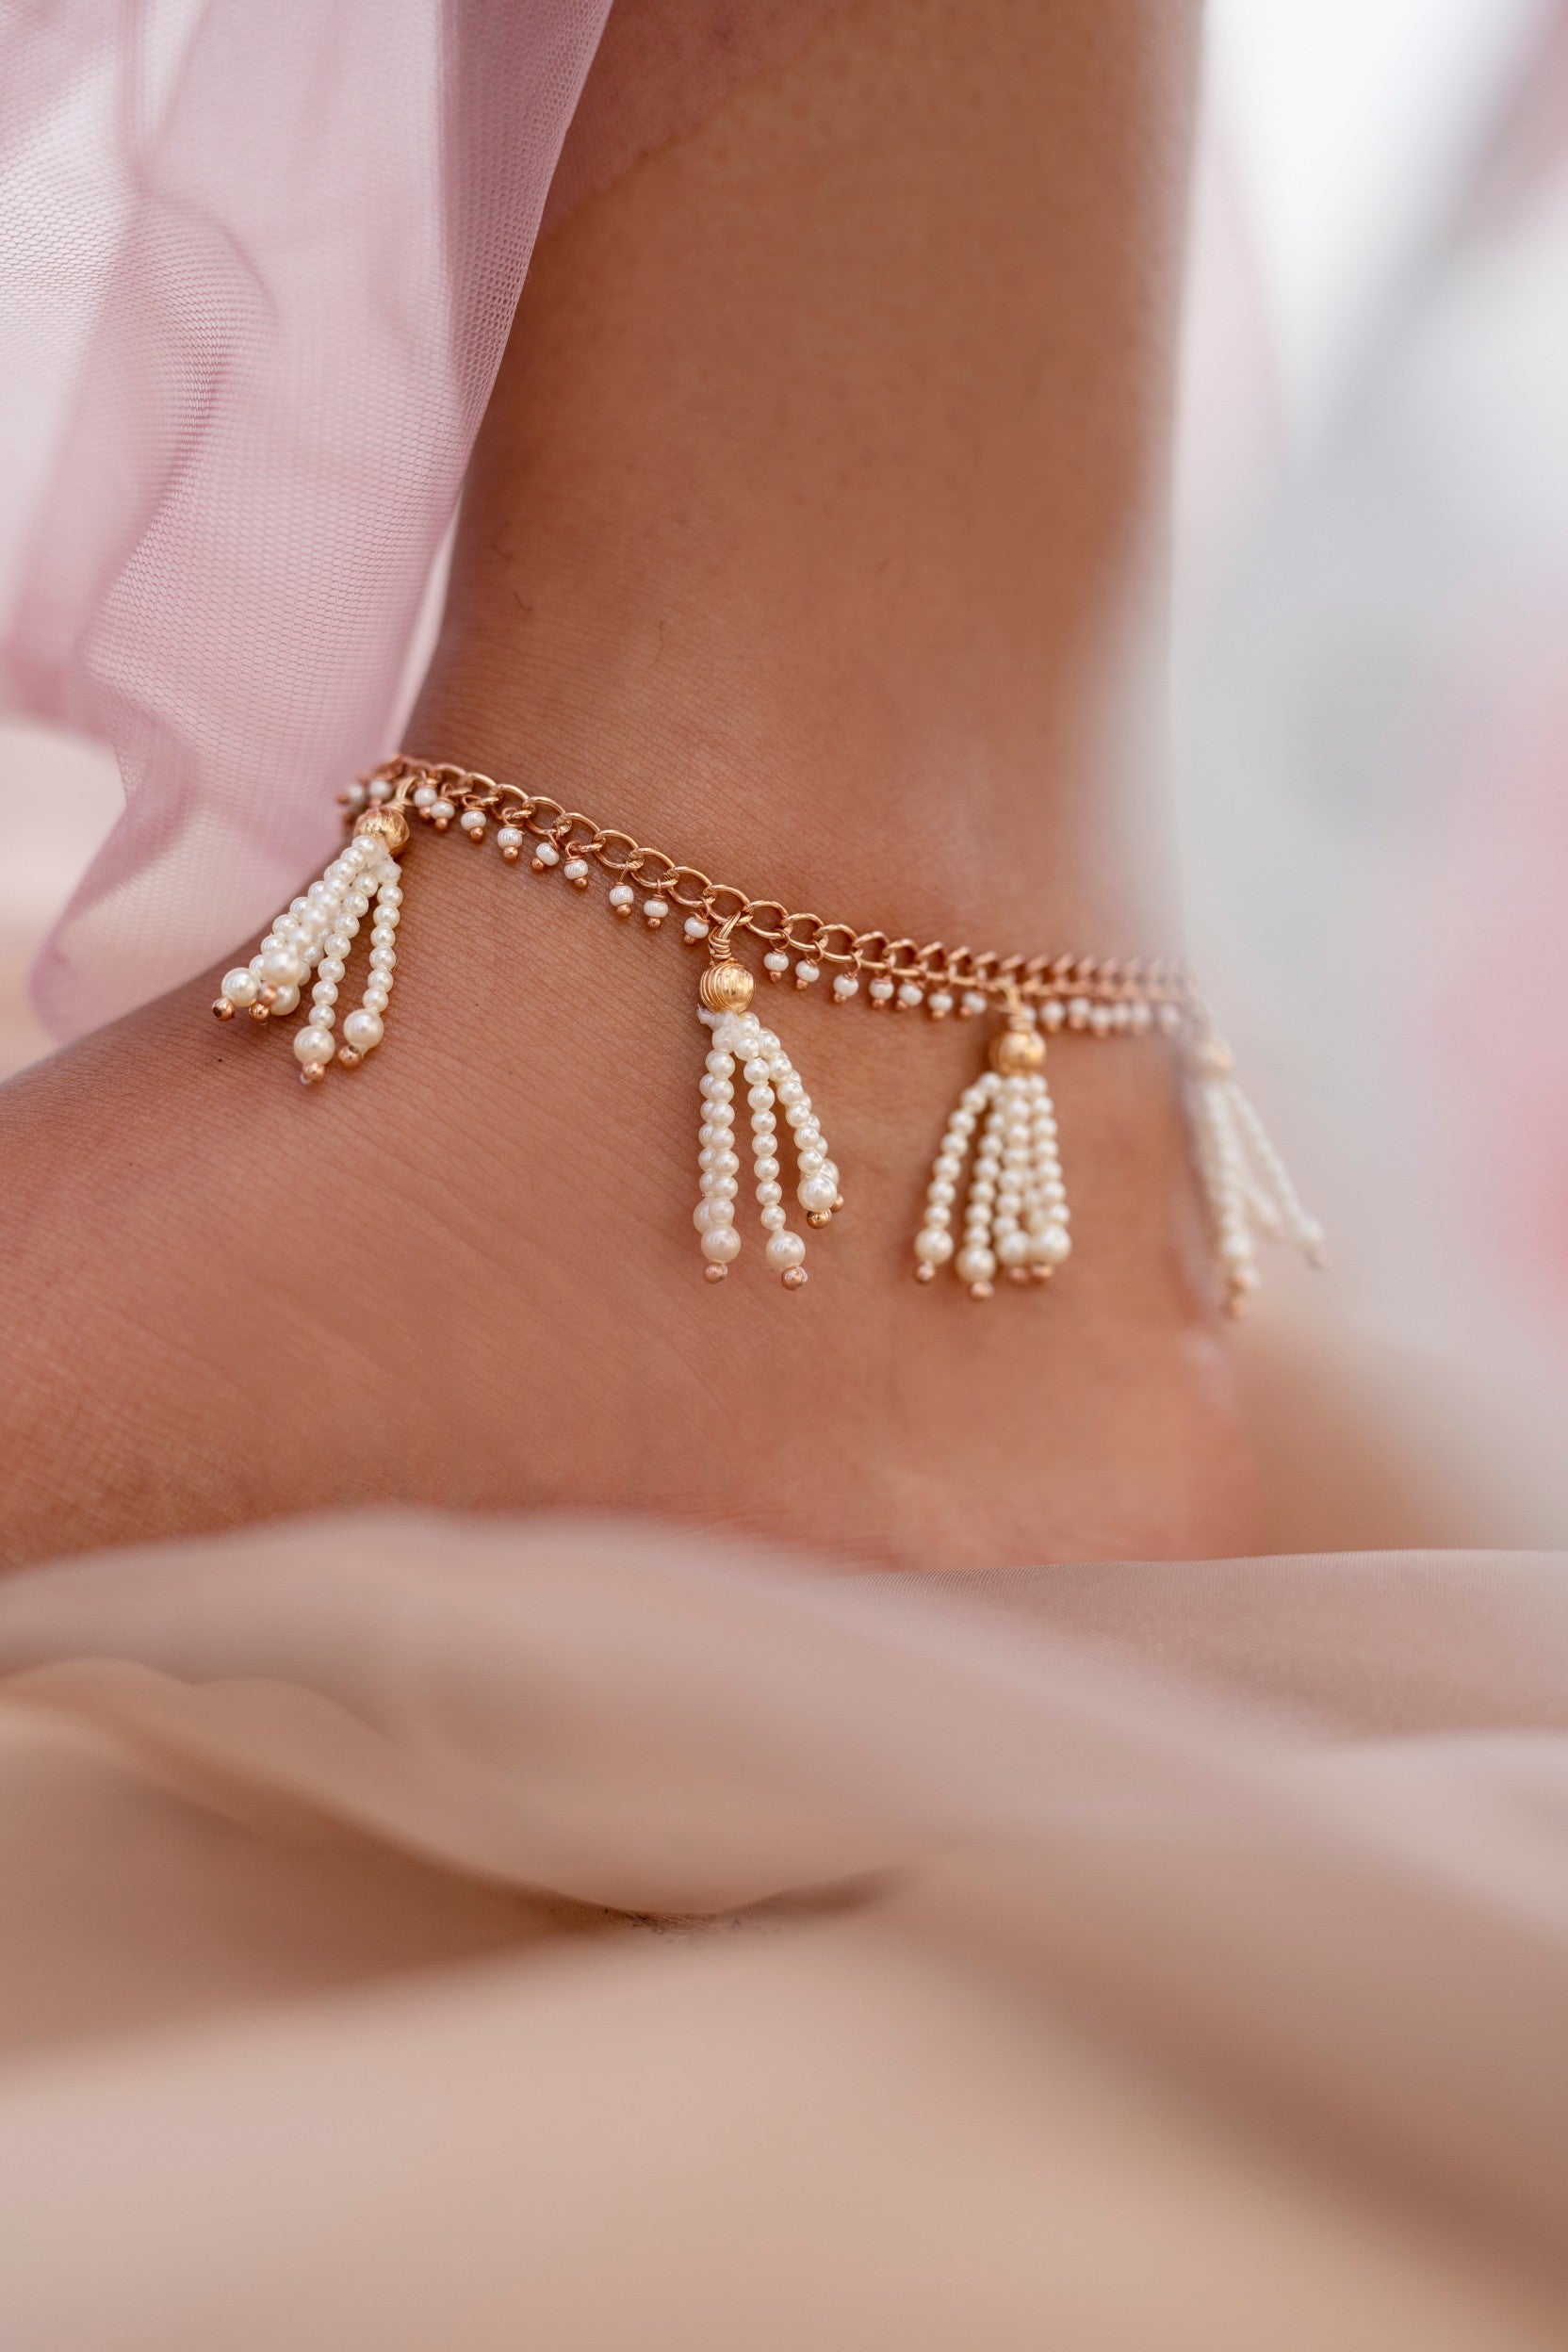 Amama,White Pearl Anklets